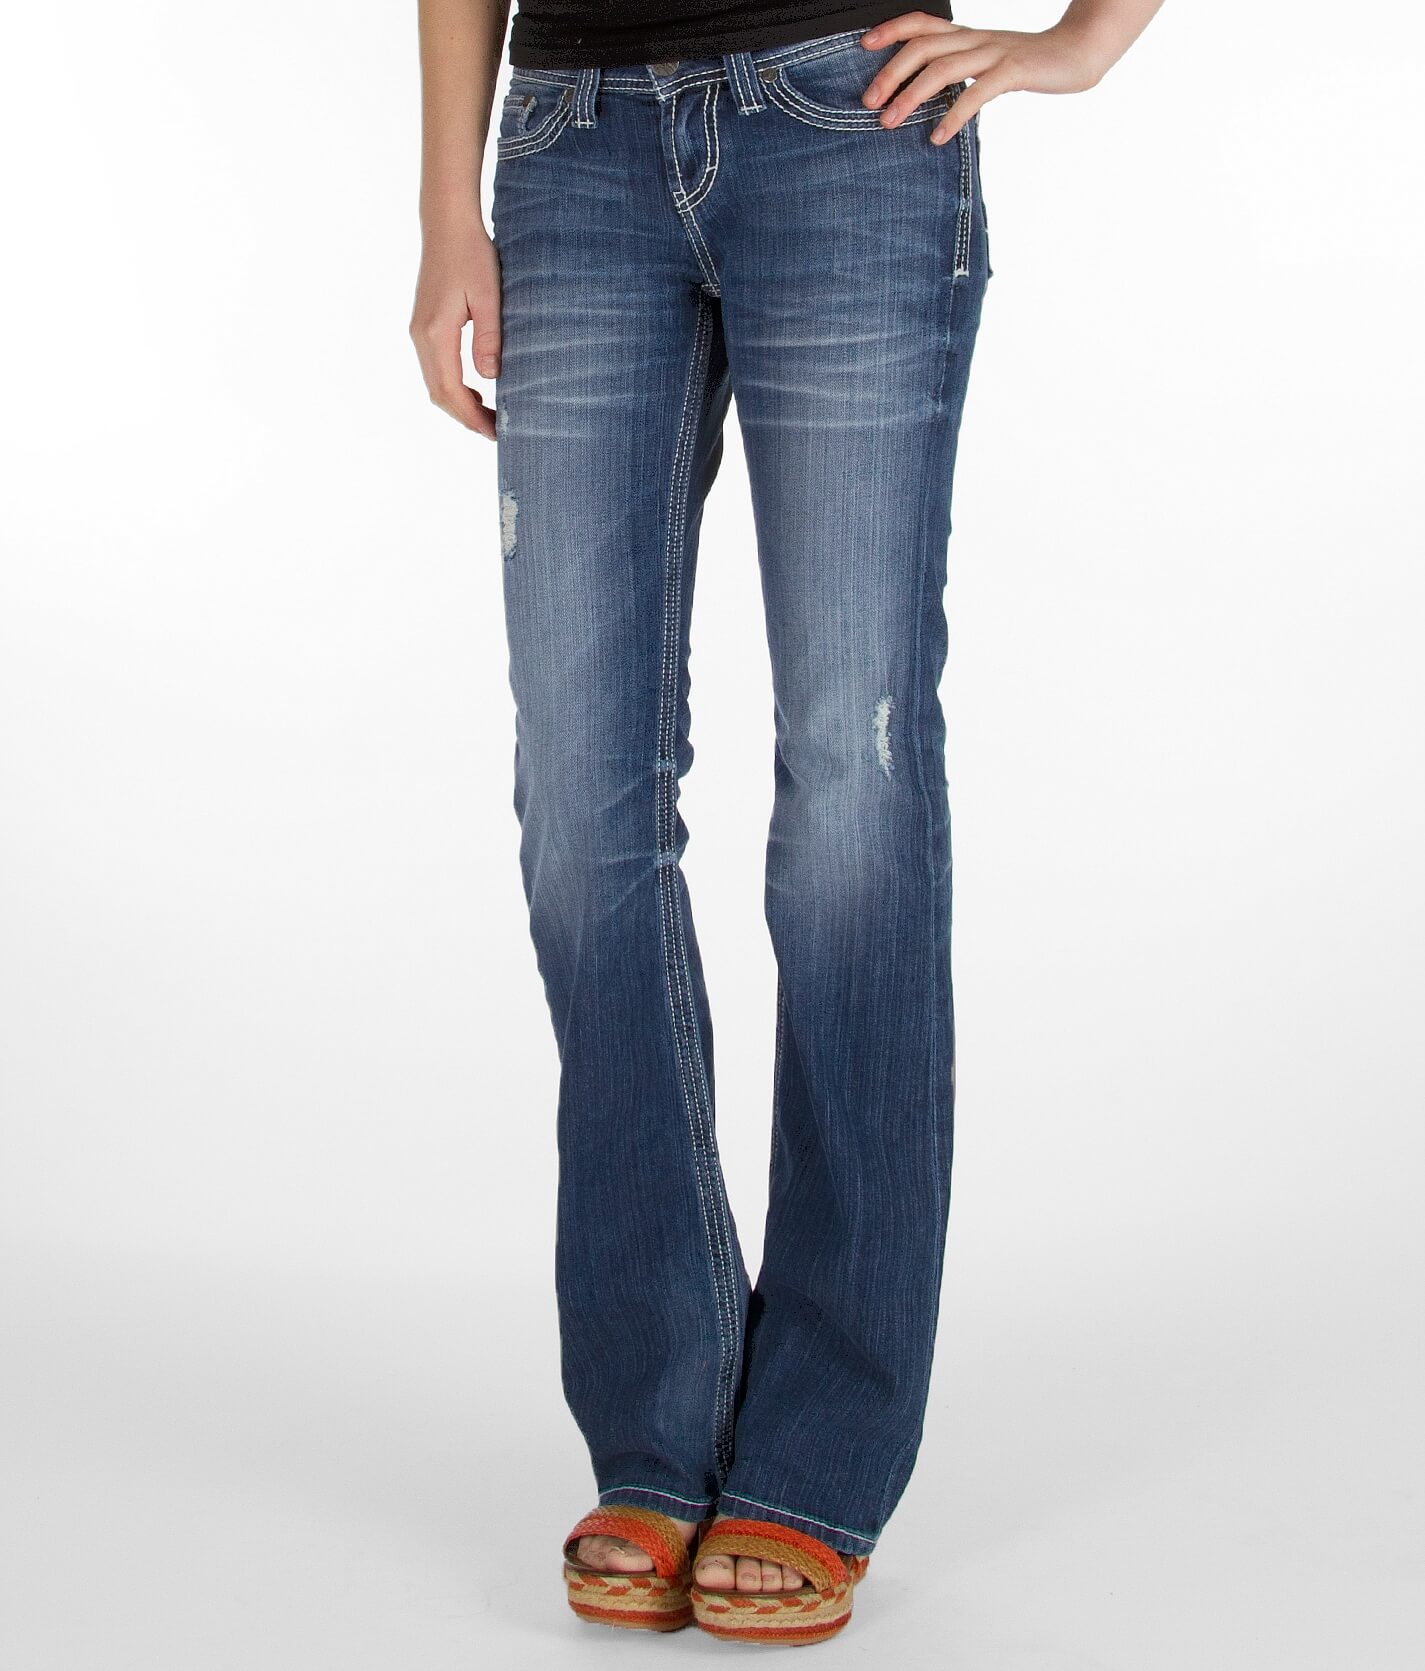 buckle stretch jeans